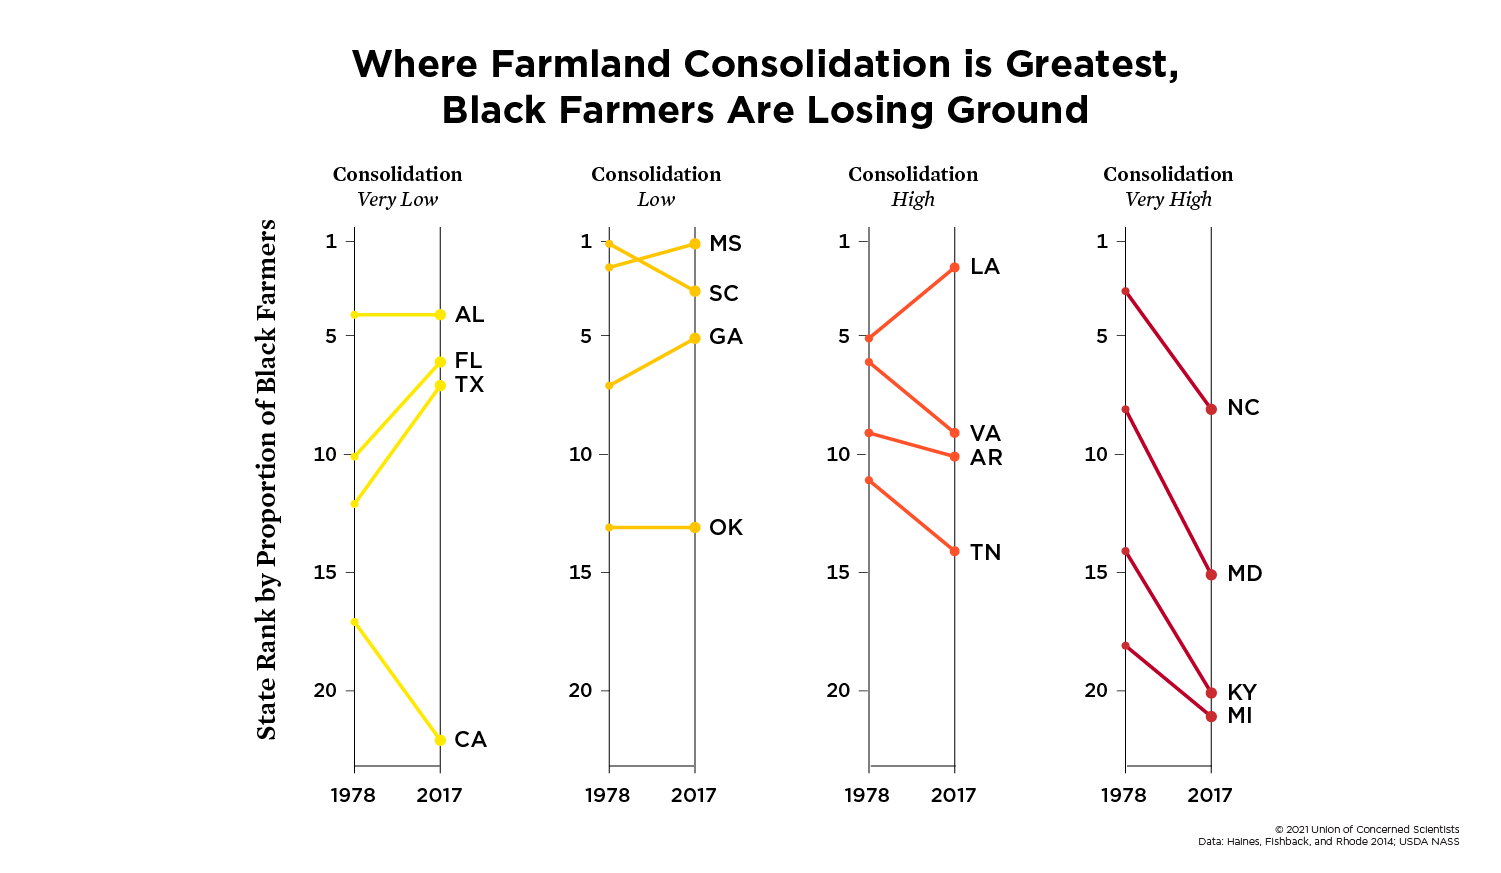 Set of line graphs showing association between consolidation and percentage of Black farmers